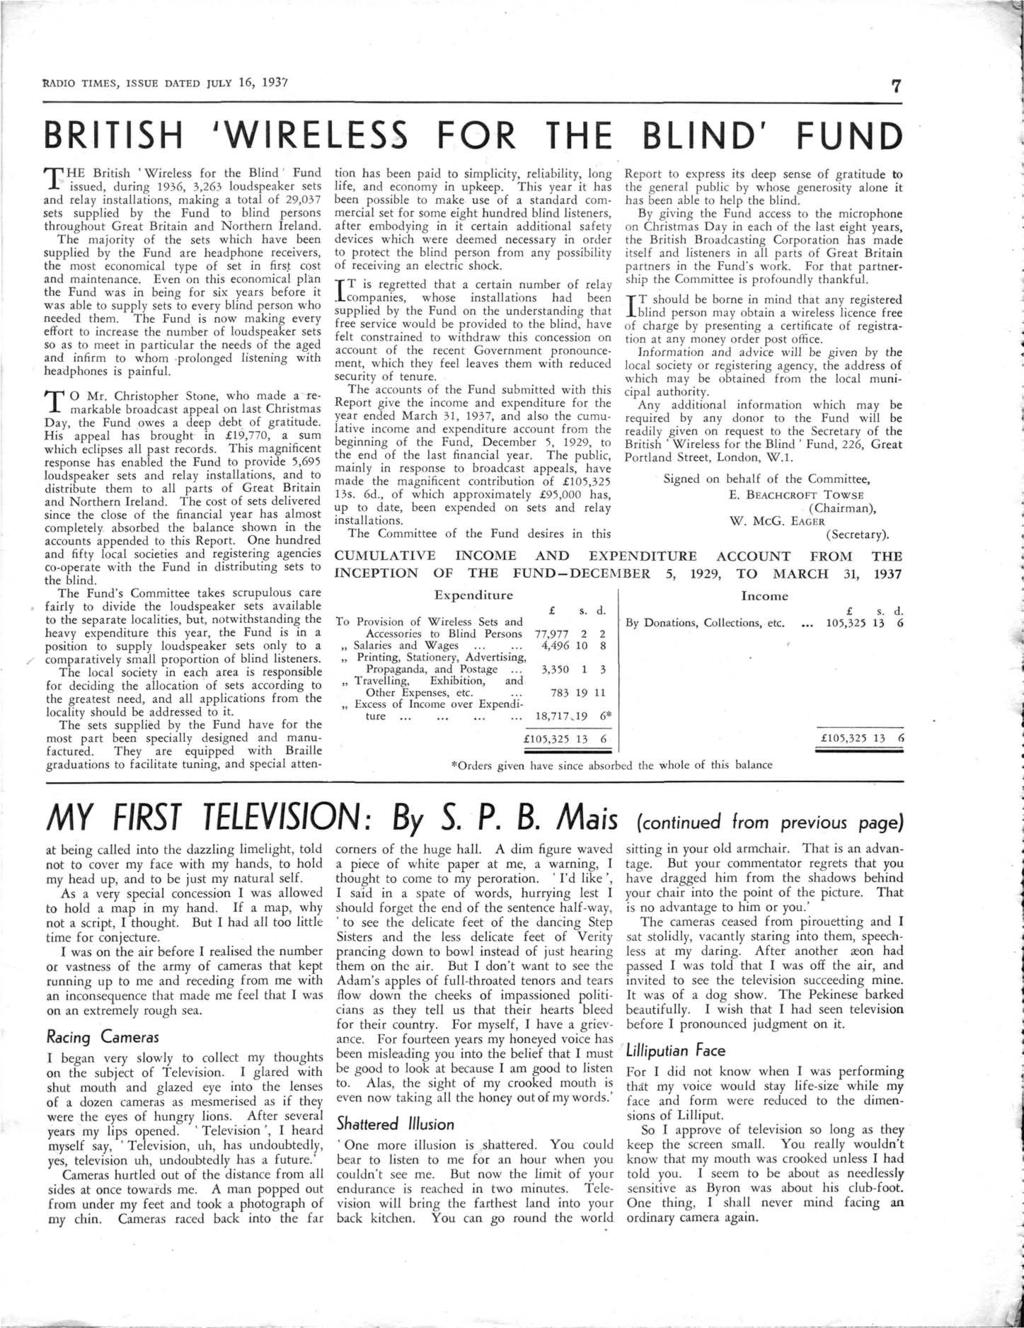 RADIO TIMES, ISSUE DATED JULY 16, 1937 7 BRITISH 'WIRELESS FOR THE BLIND' FUND THE Britih 'Wirele for the Blind' Fund iued, during 1936, 3,263 loudpeaker et and relay intallation, making a total of